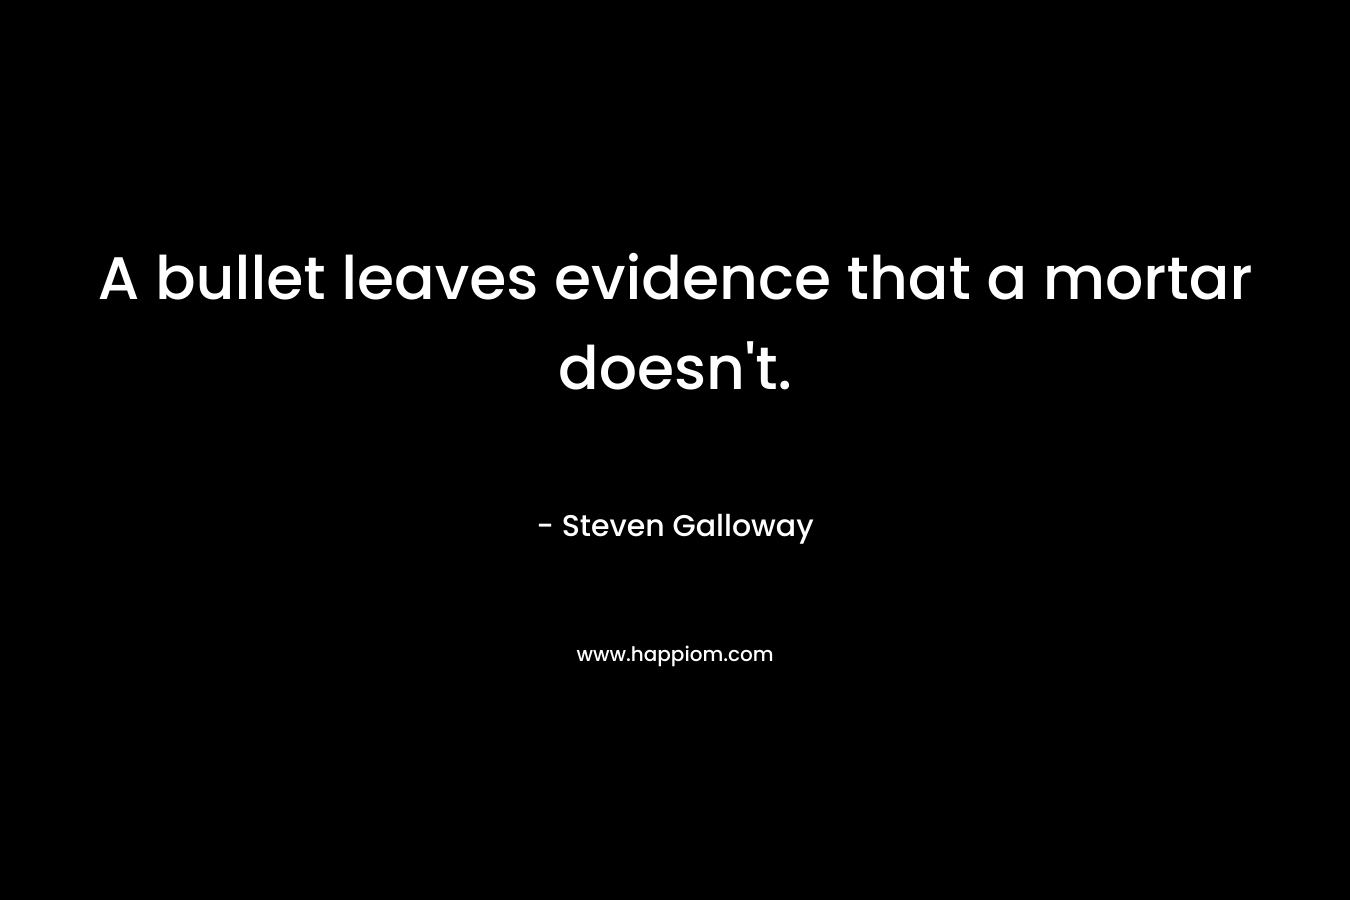 A bullet leaves evidence that a mortar doesn’t. – Steven Galloway